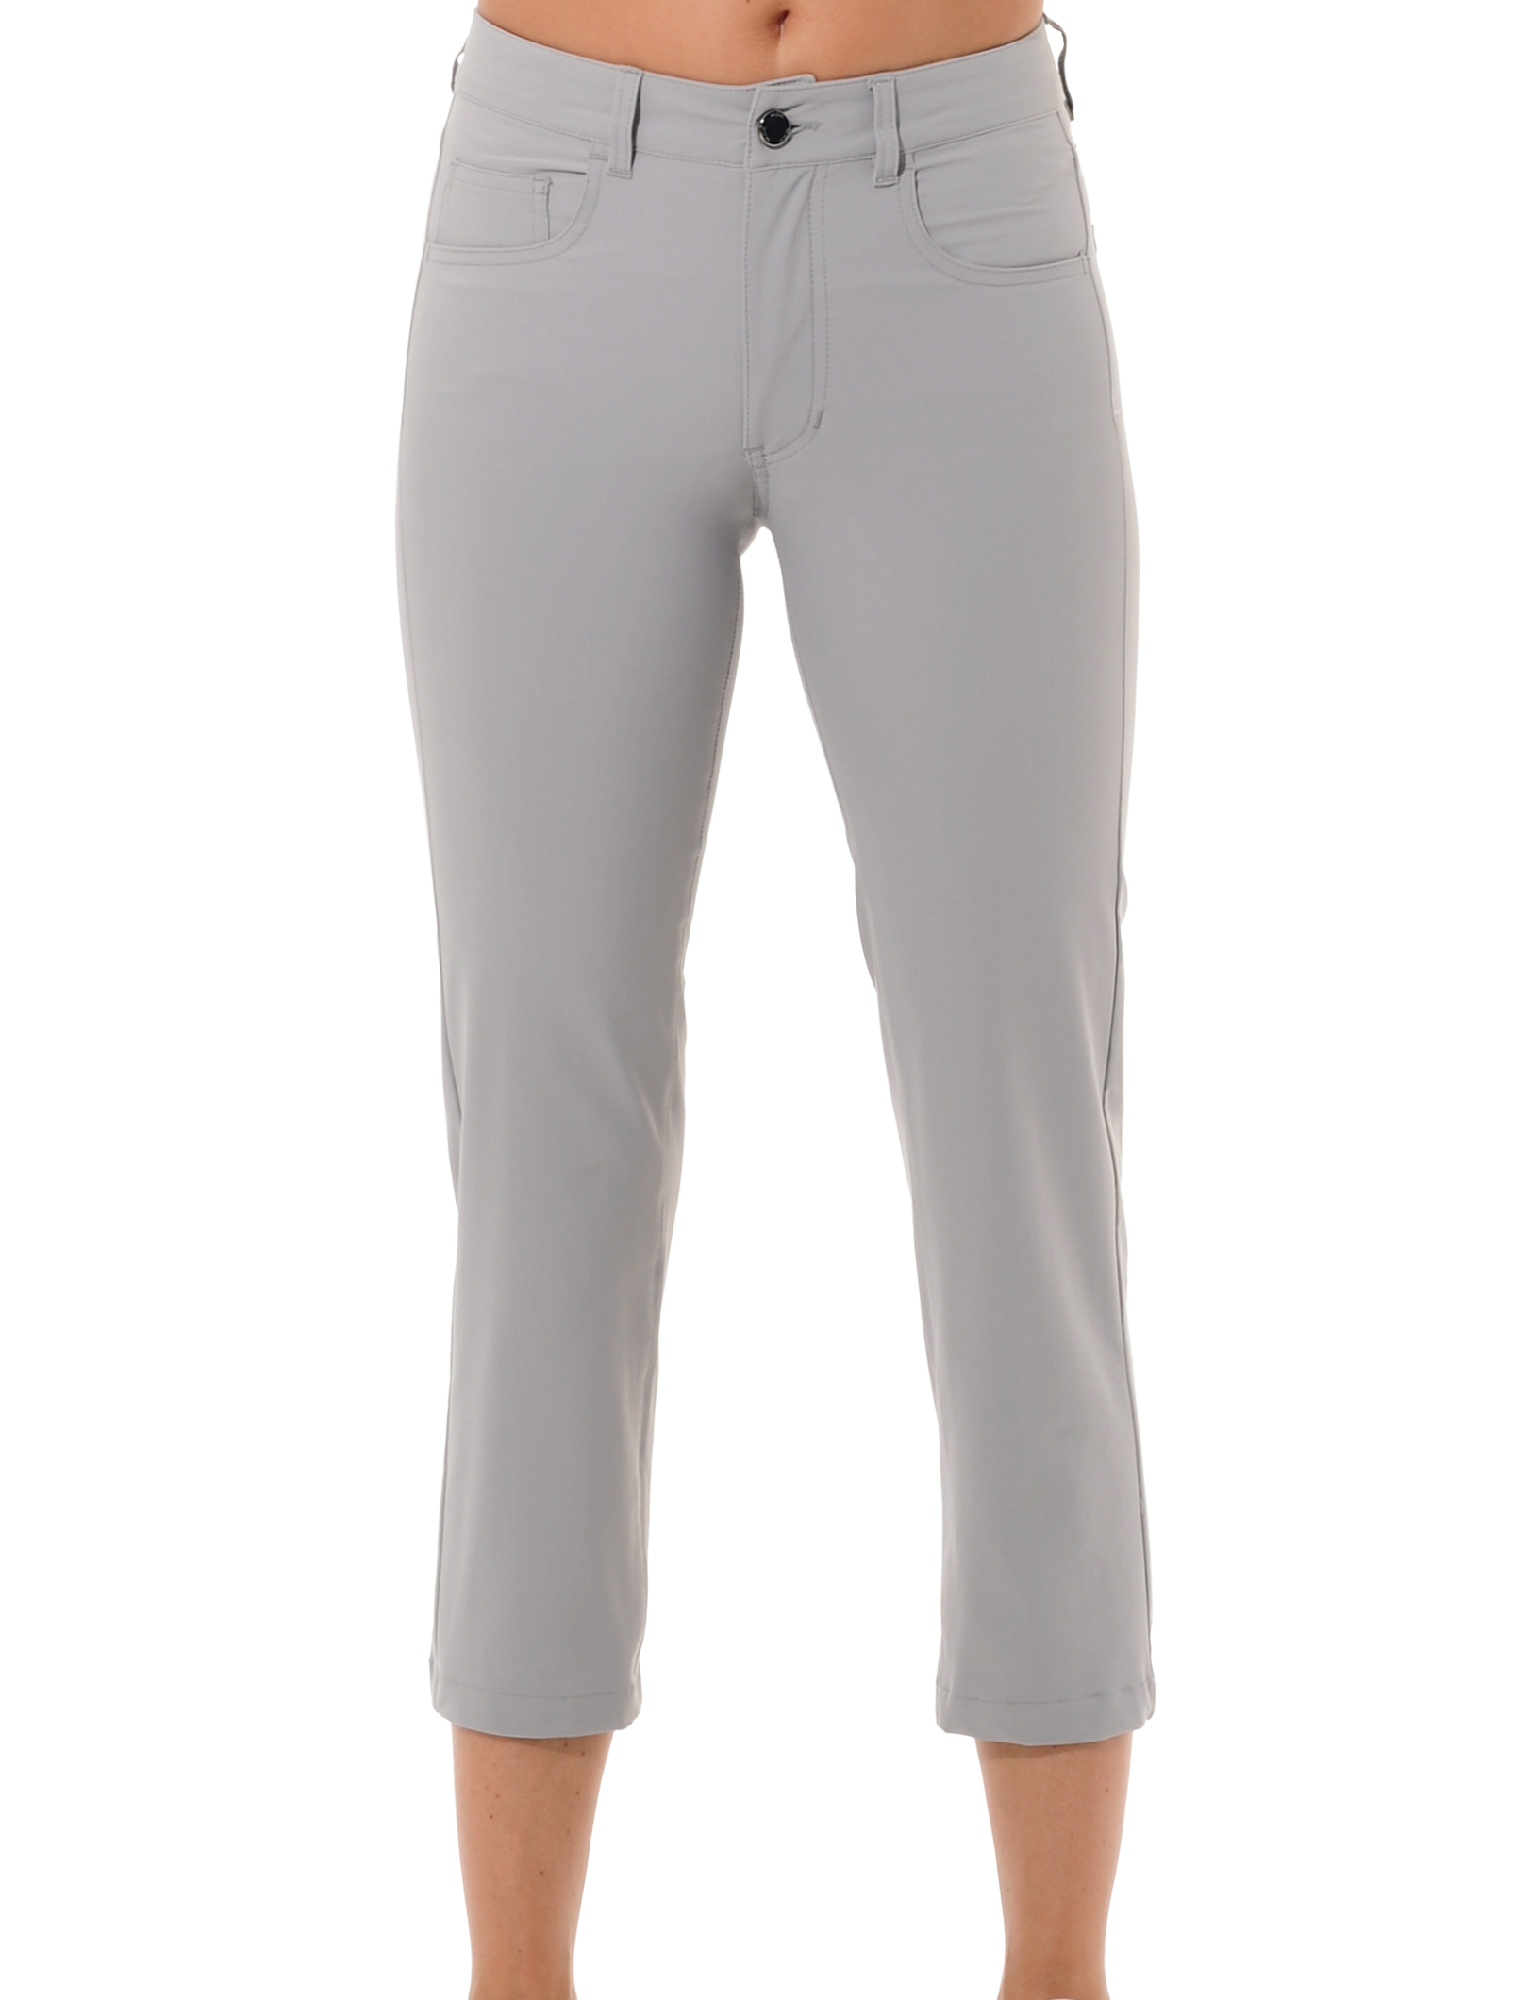 4way stretch cropped straight cut pants grey 